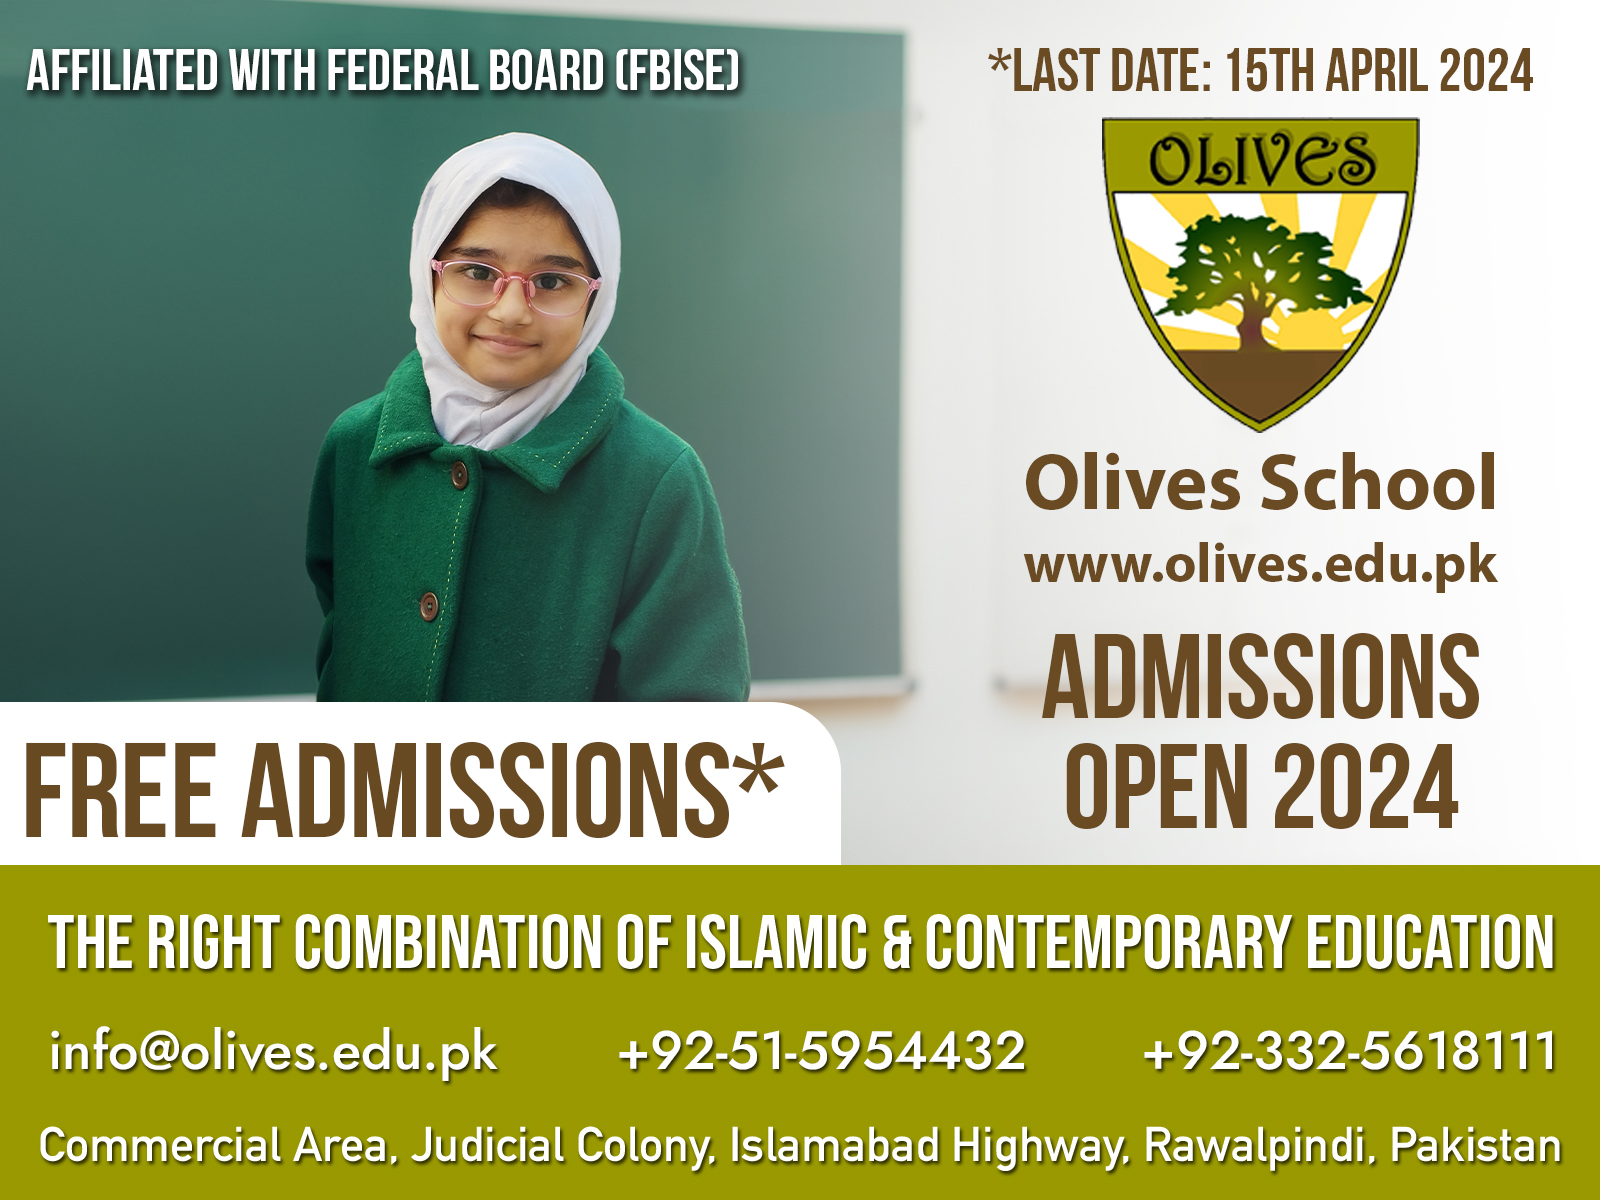 Olives School Admissions 2023